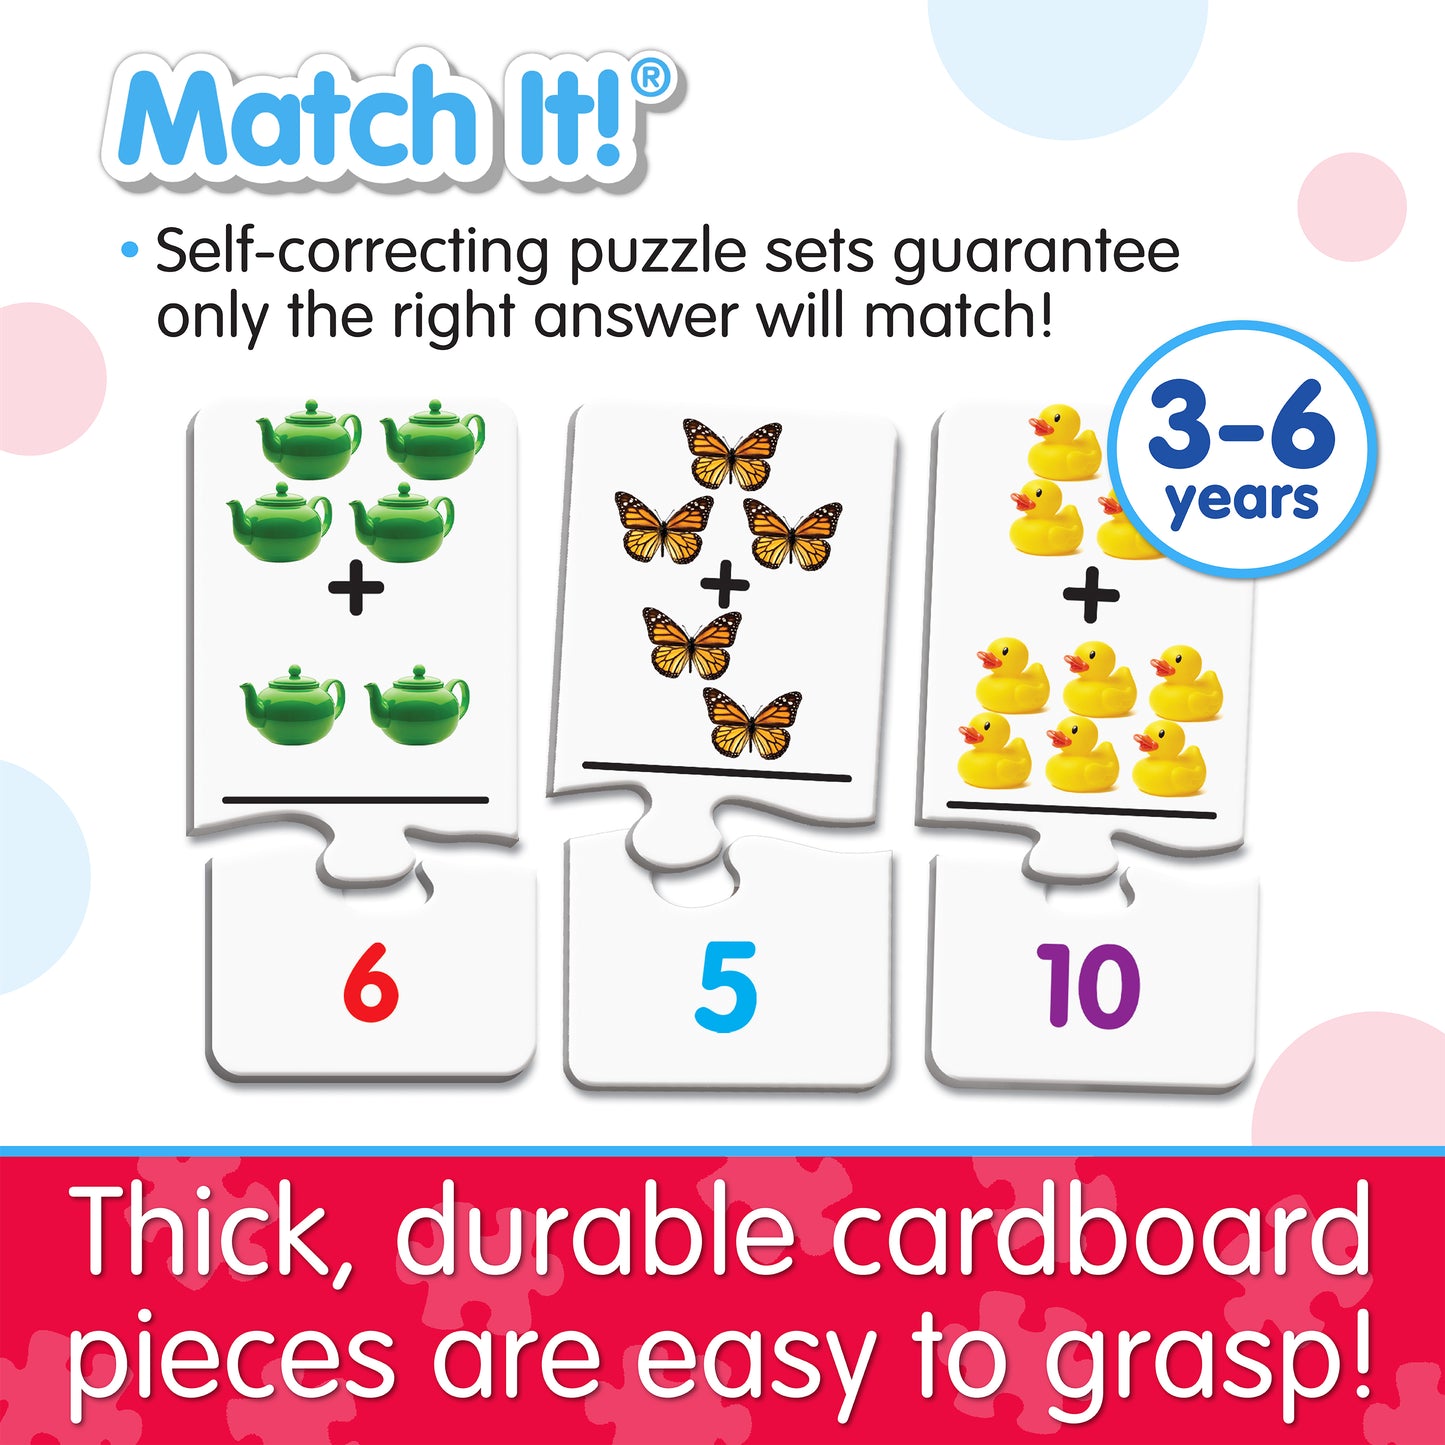 Infographic about Match It - Add It Up's features that says, "Thick, durable cardboard pieces are easy to grasp!"